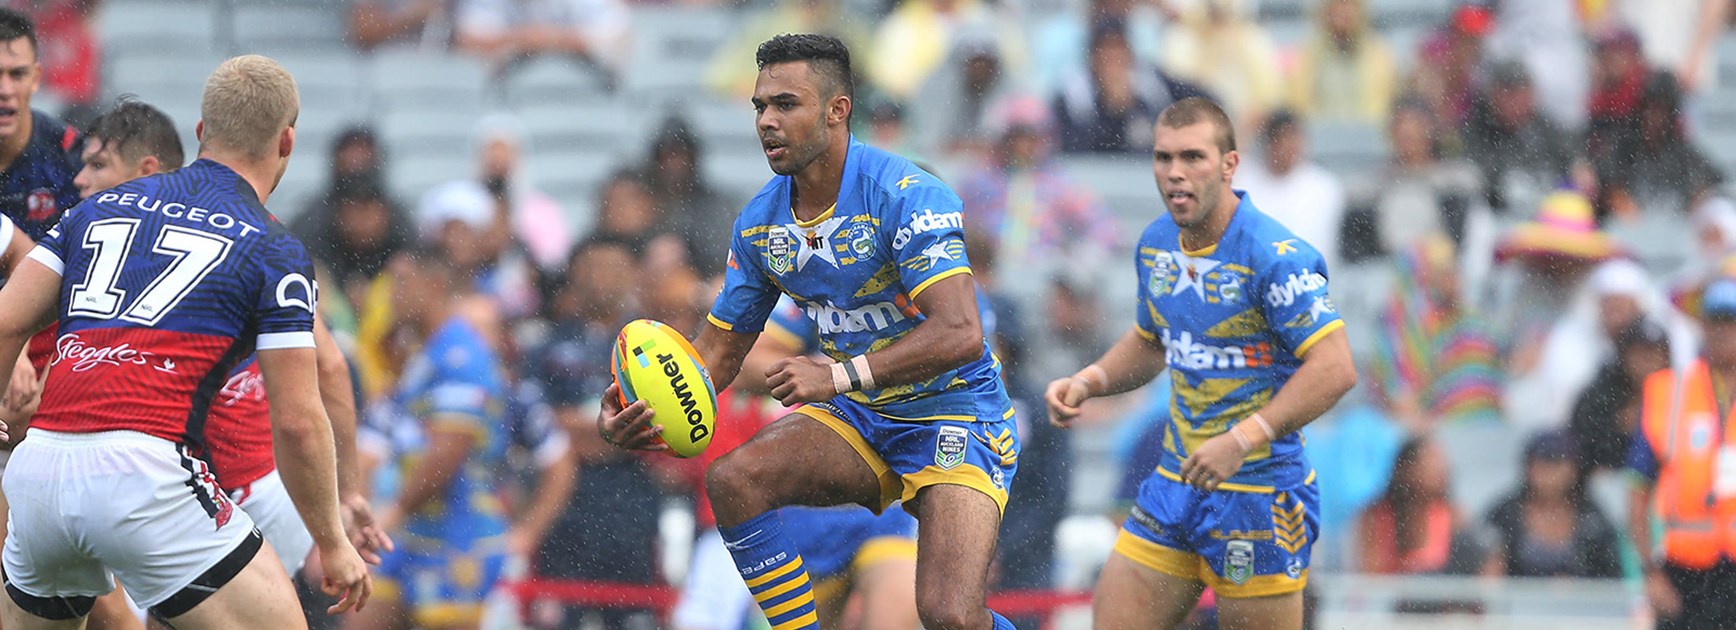 Parramatta rookie Bevan French scored two tries in his side's win over the Roosters at the Auckland Nines.